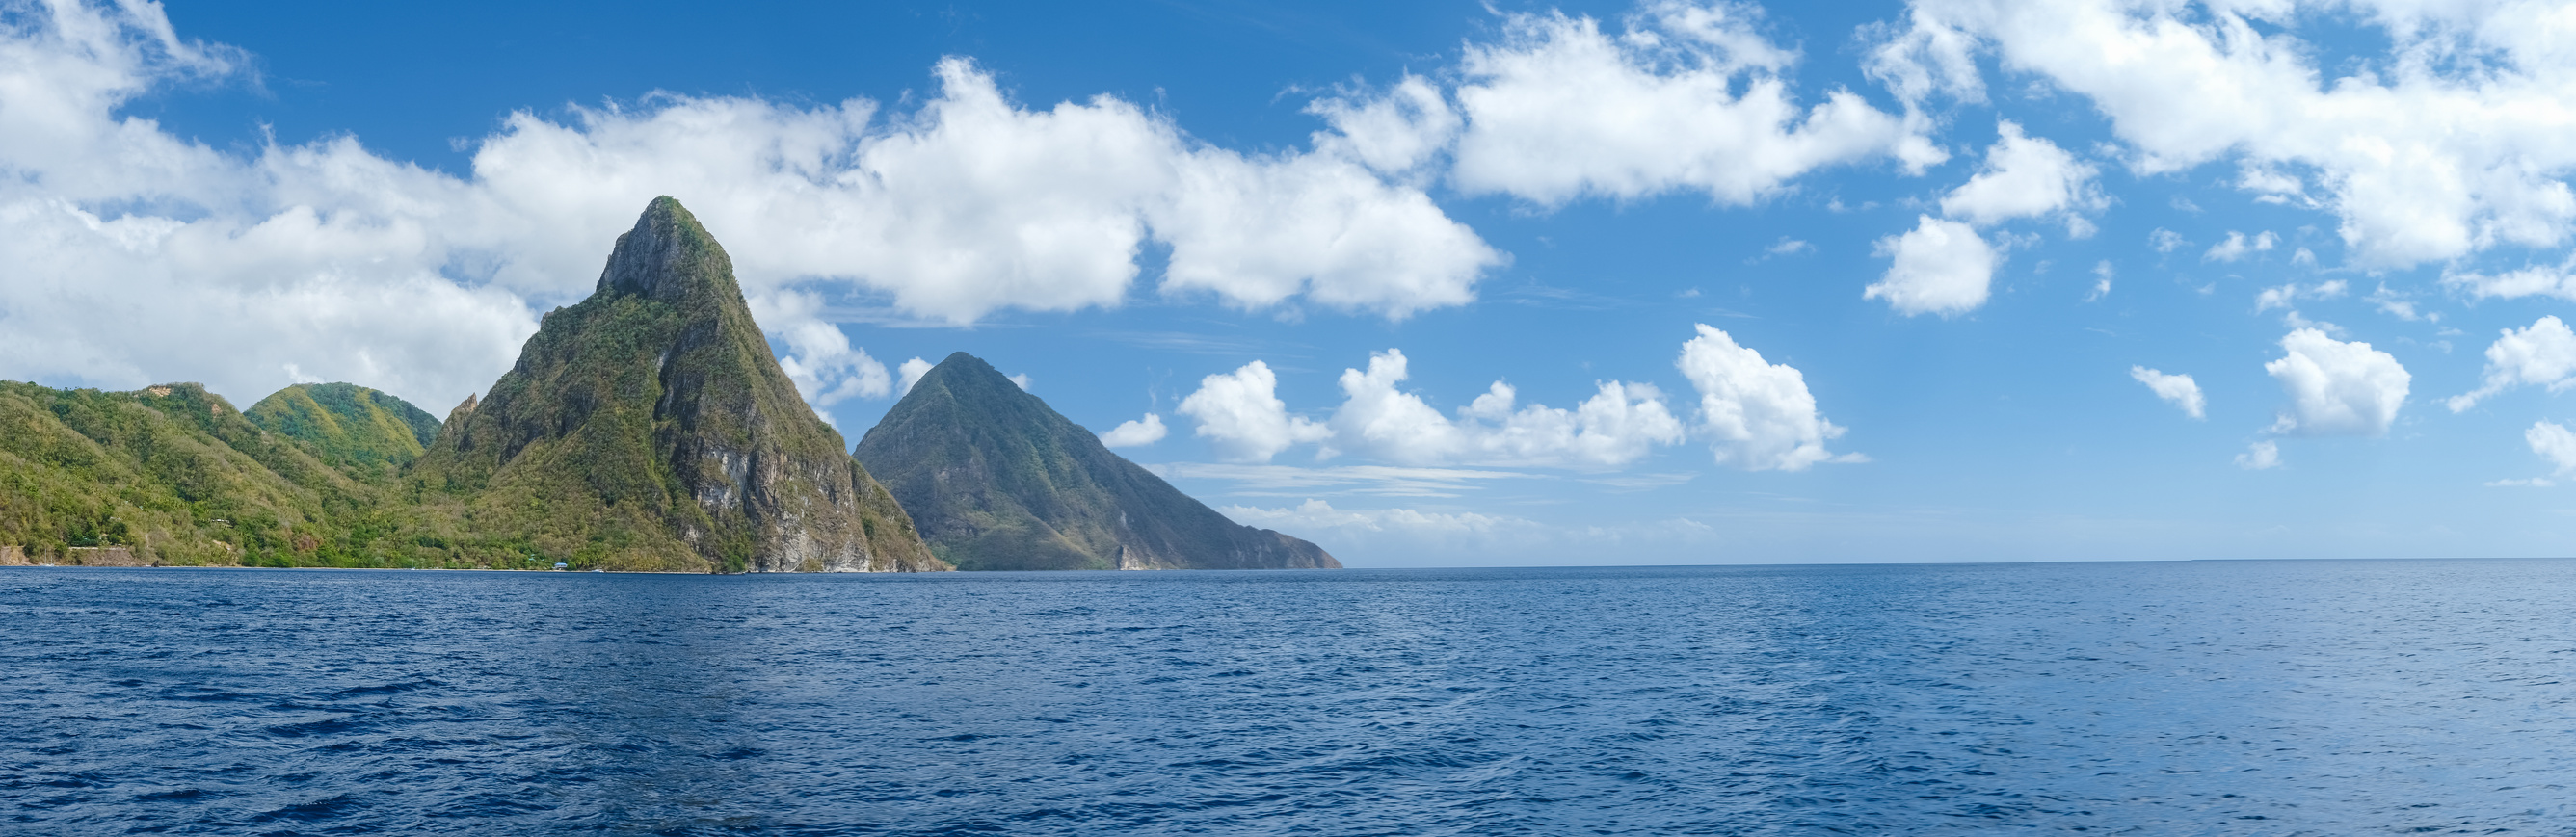 Pitons moutains of Saint Lucia, St. Lucia Caribbean Sea with Pitons